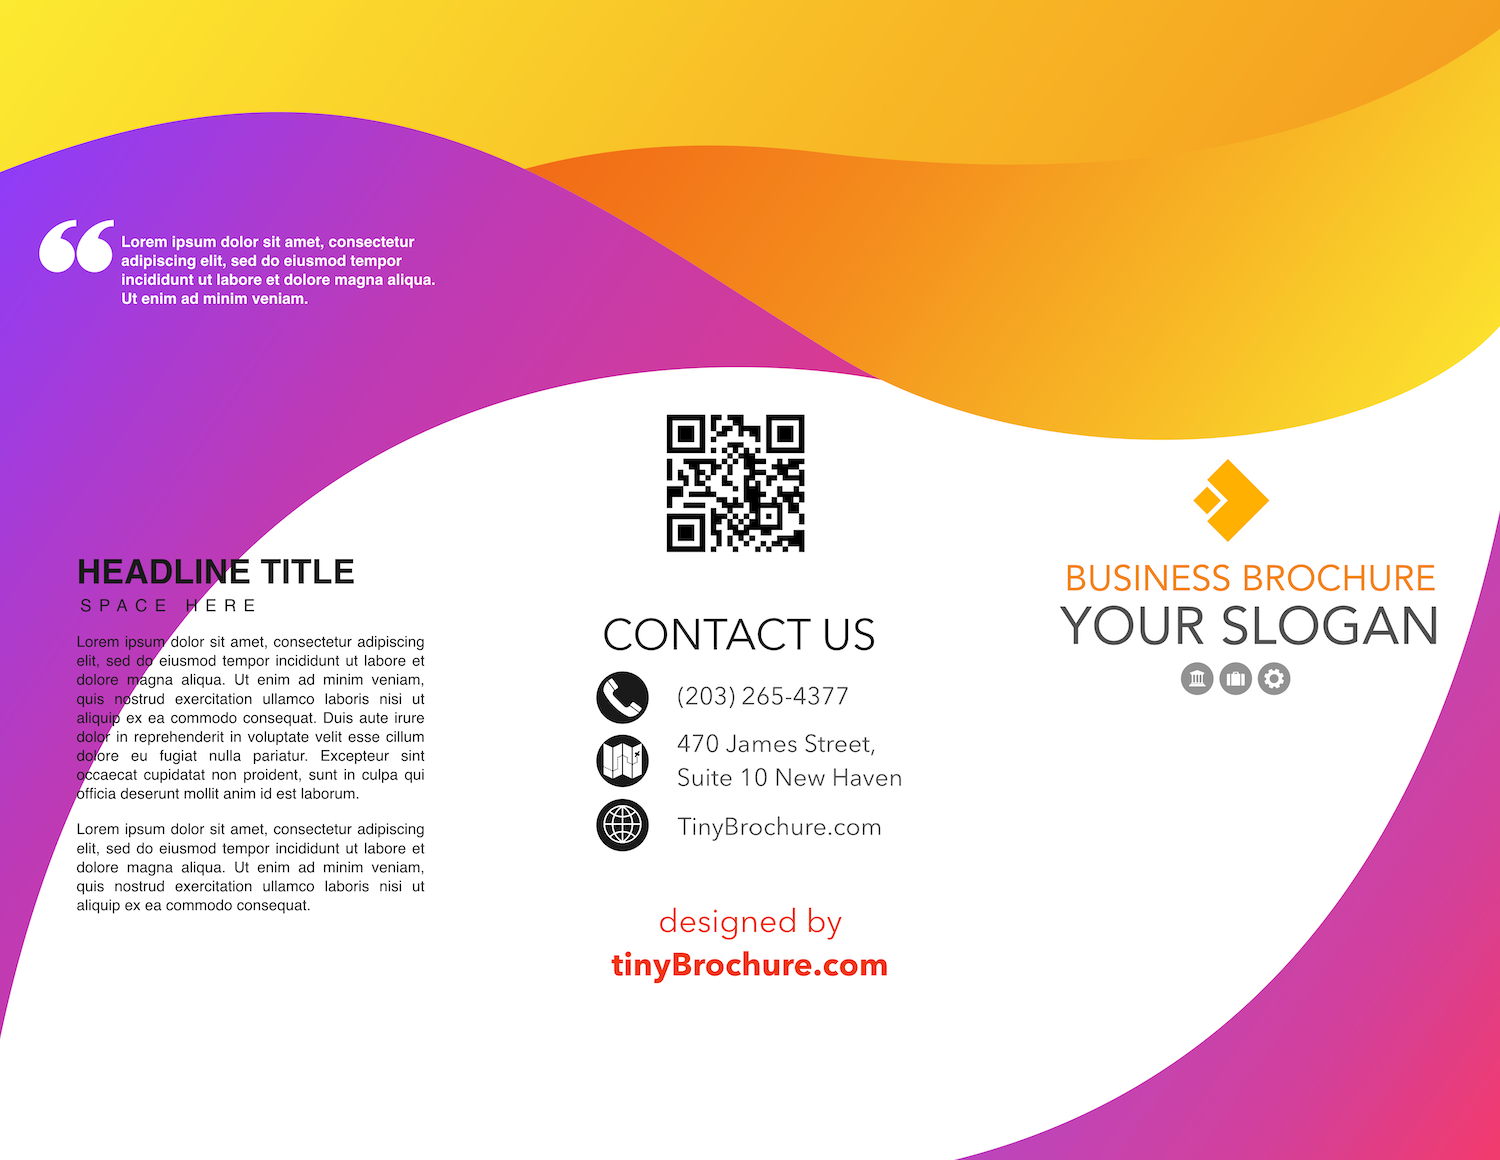 How To Make A Tri Fold Brochure In Google Docs Regarding Google Docs Tri Fold Brochure Template